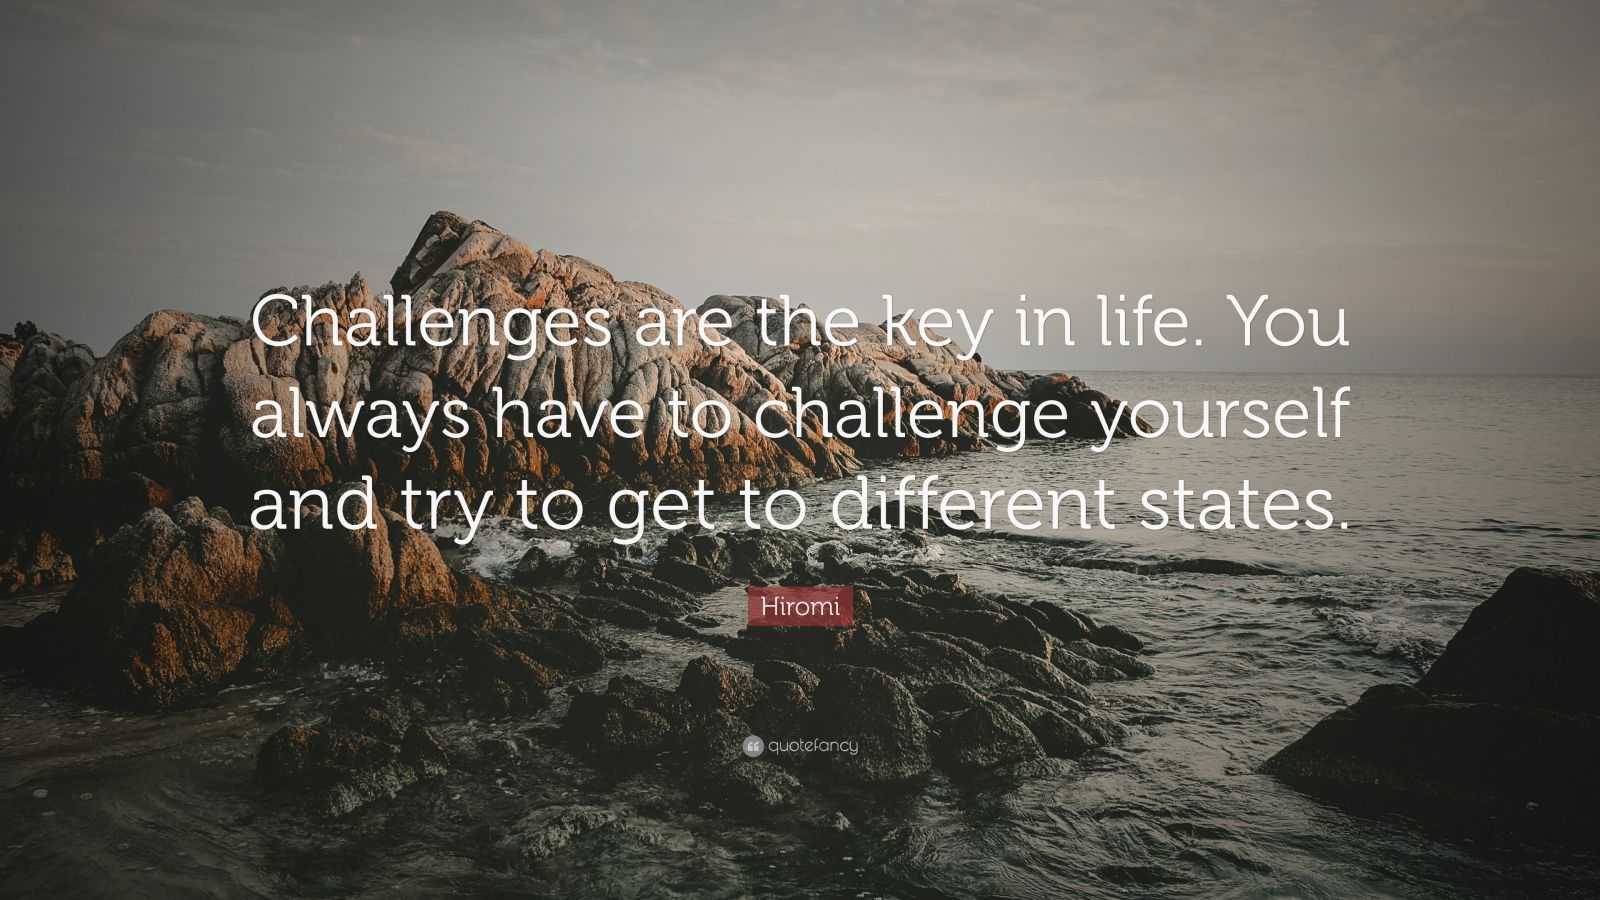 Hiromi Quote: “Challenges are the key in life. You always have to